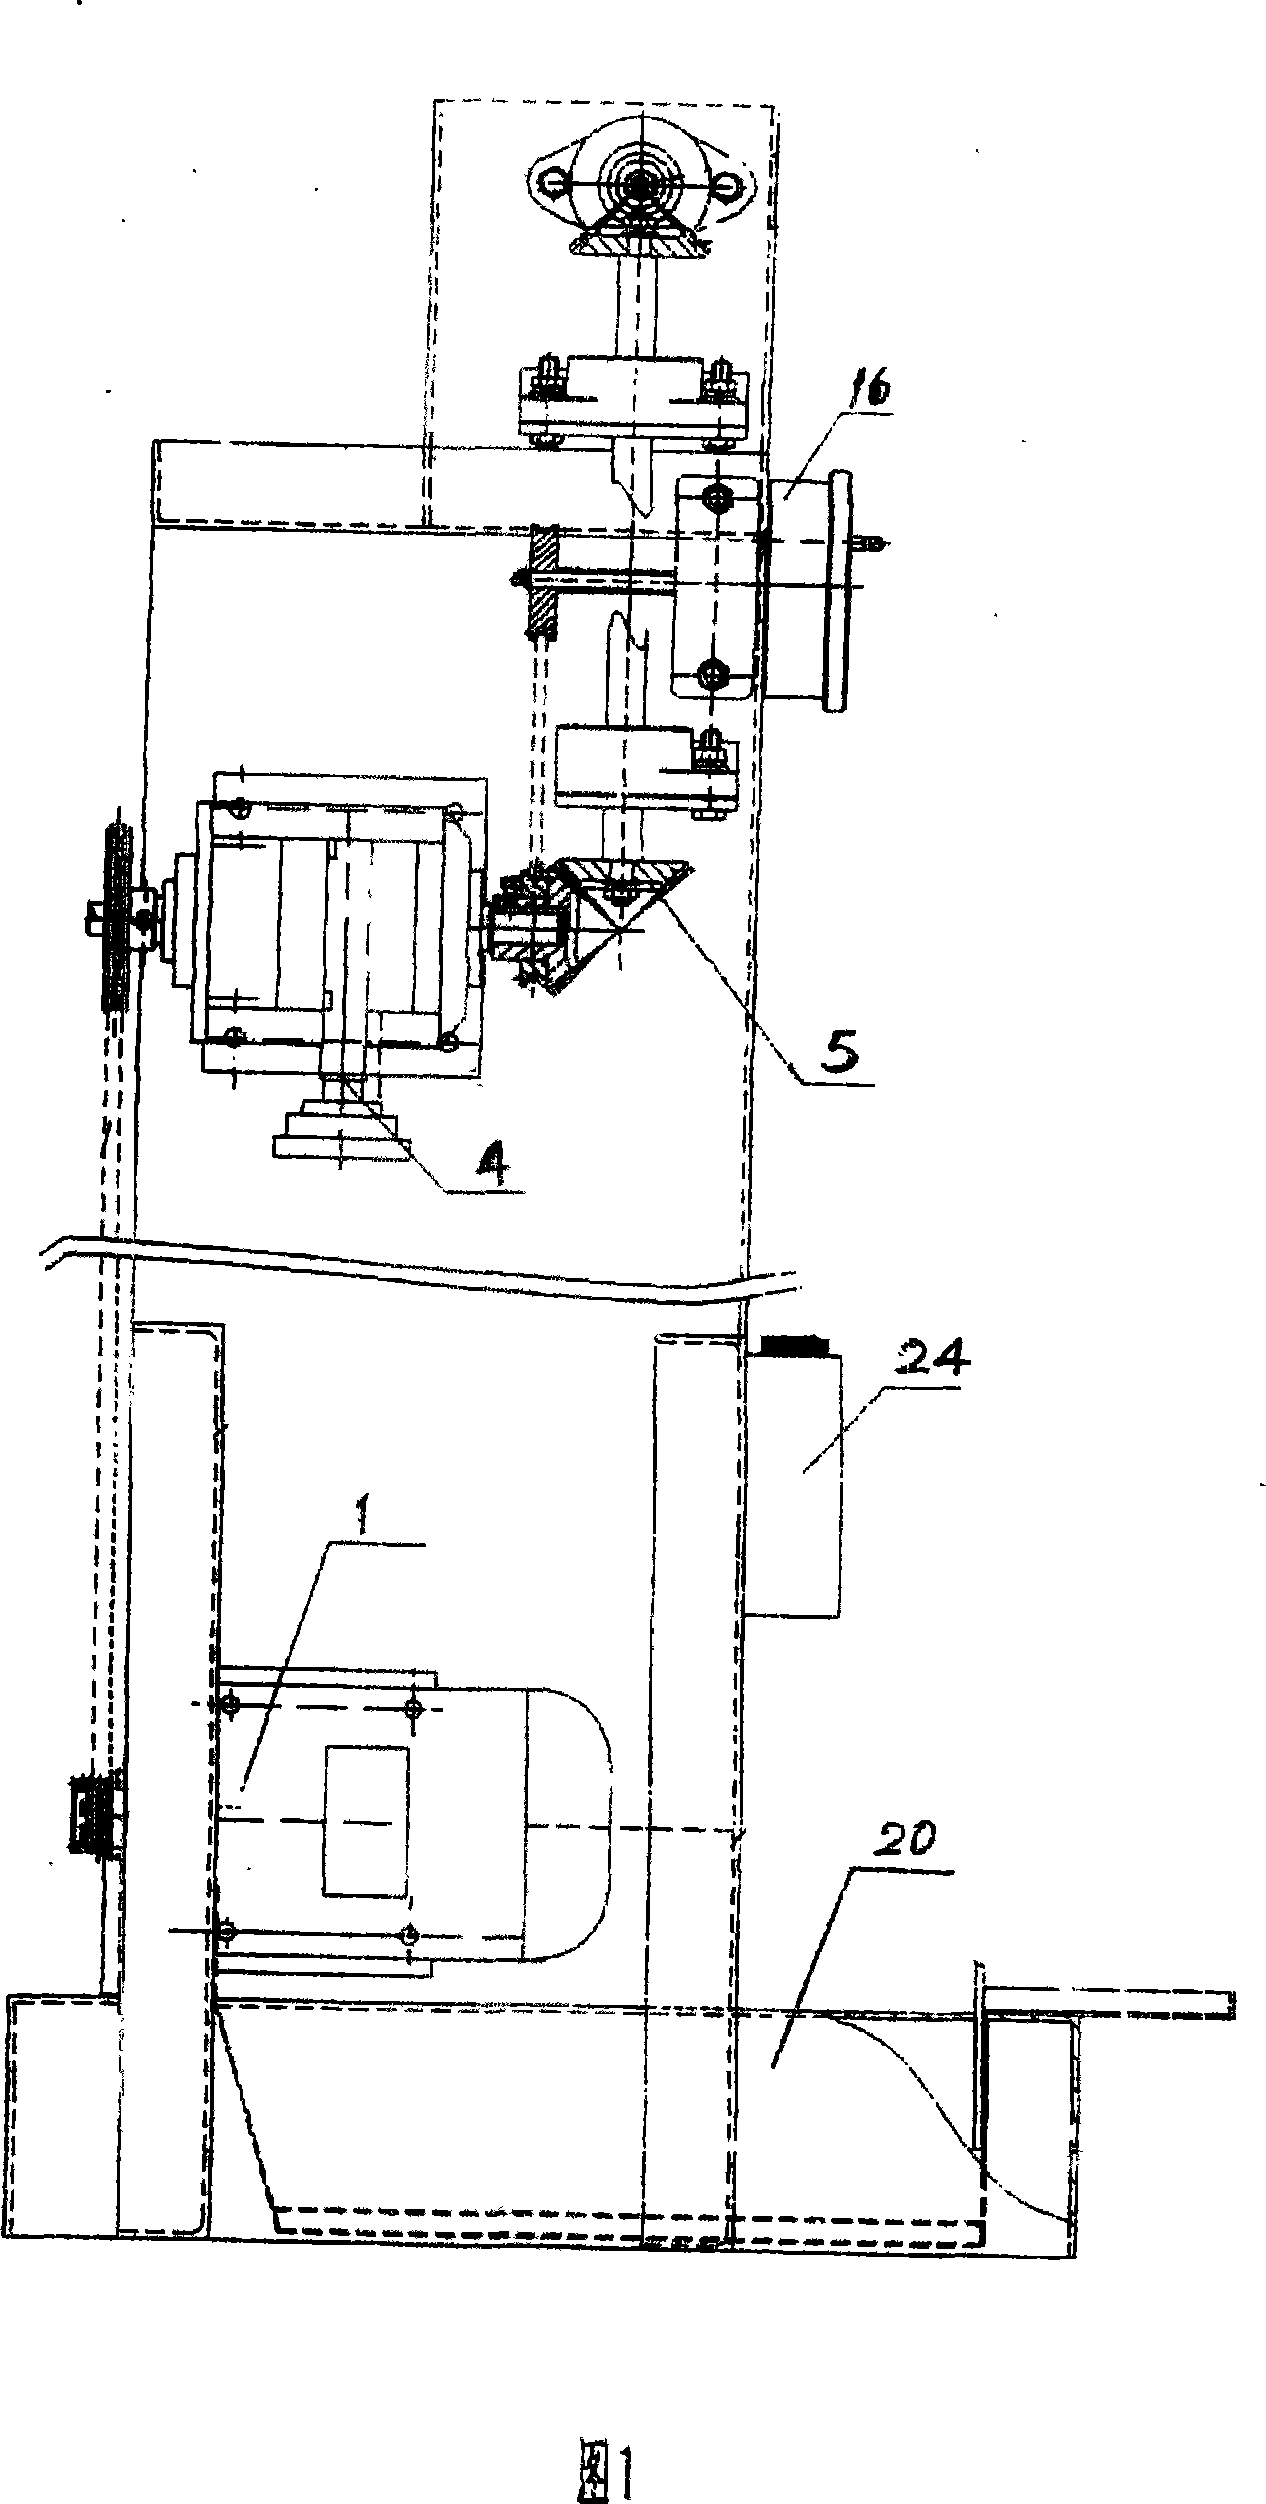 Machine with holding type collateral twisting mechanism for testing cocoon quality